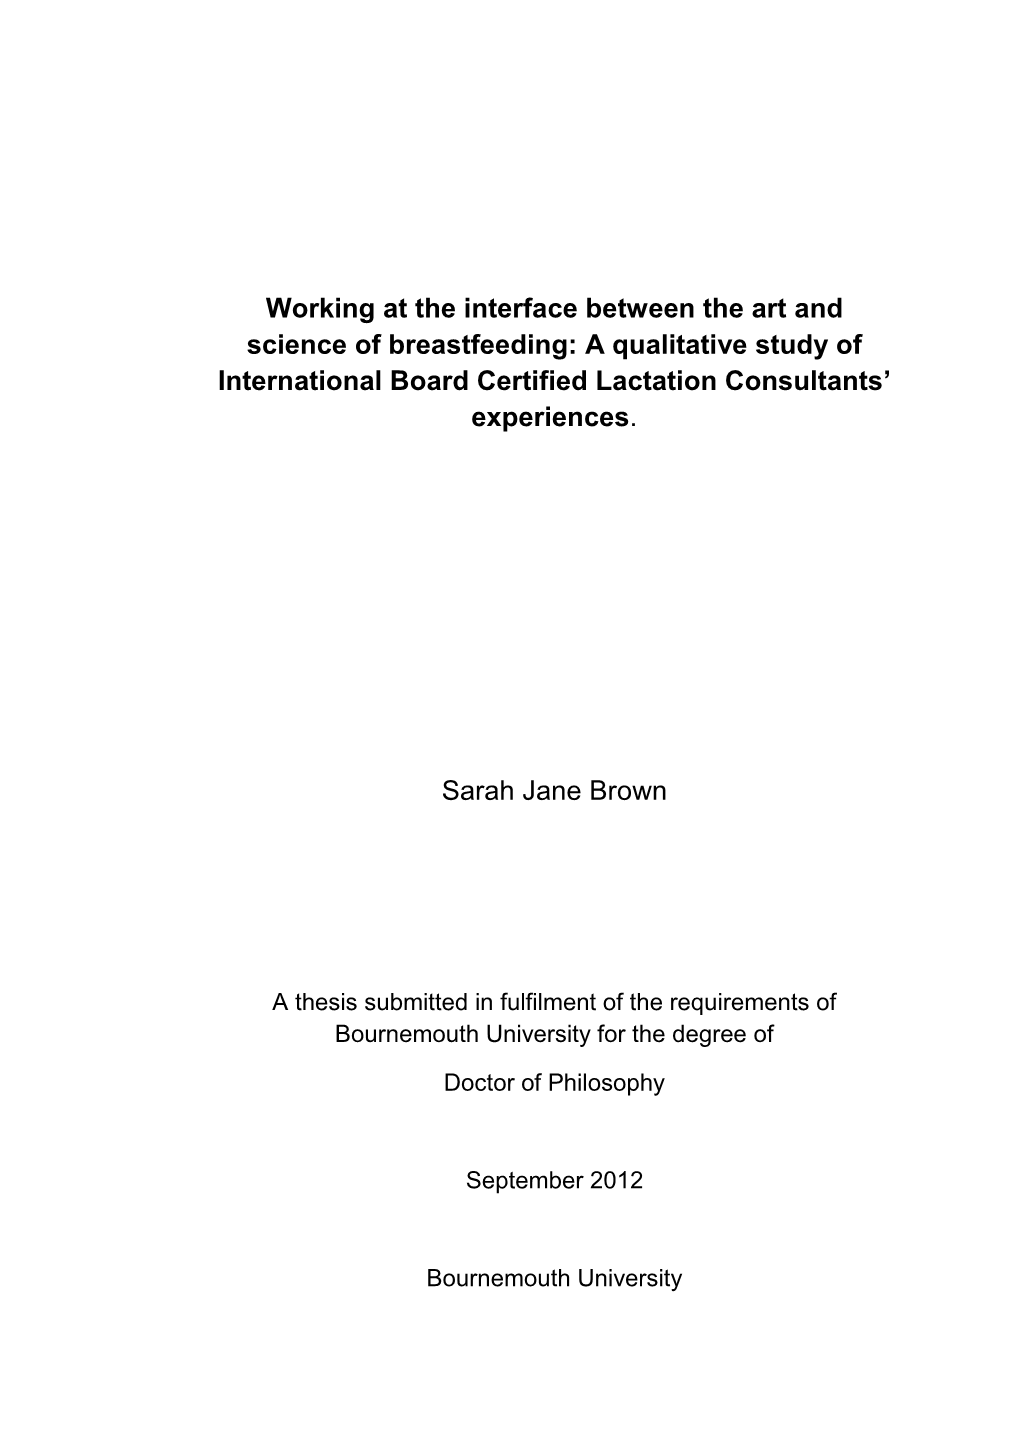 Working at the Interface Between the Art and Science of Breastfeeding: a Qualitative Study of International Board Certified Lactation Consultants’ Experiences